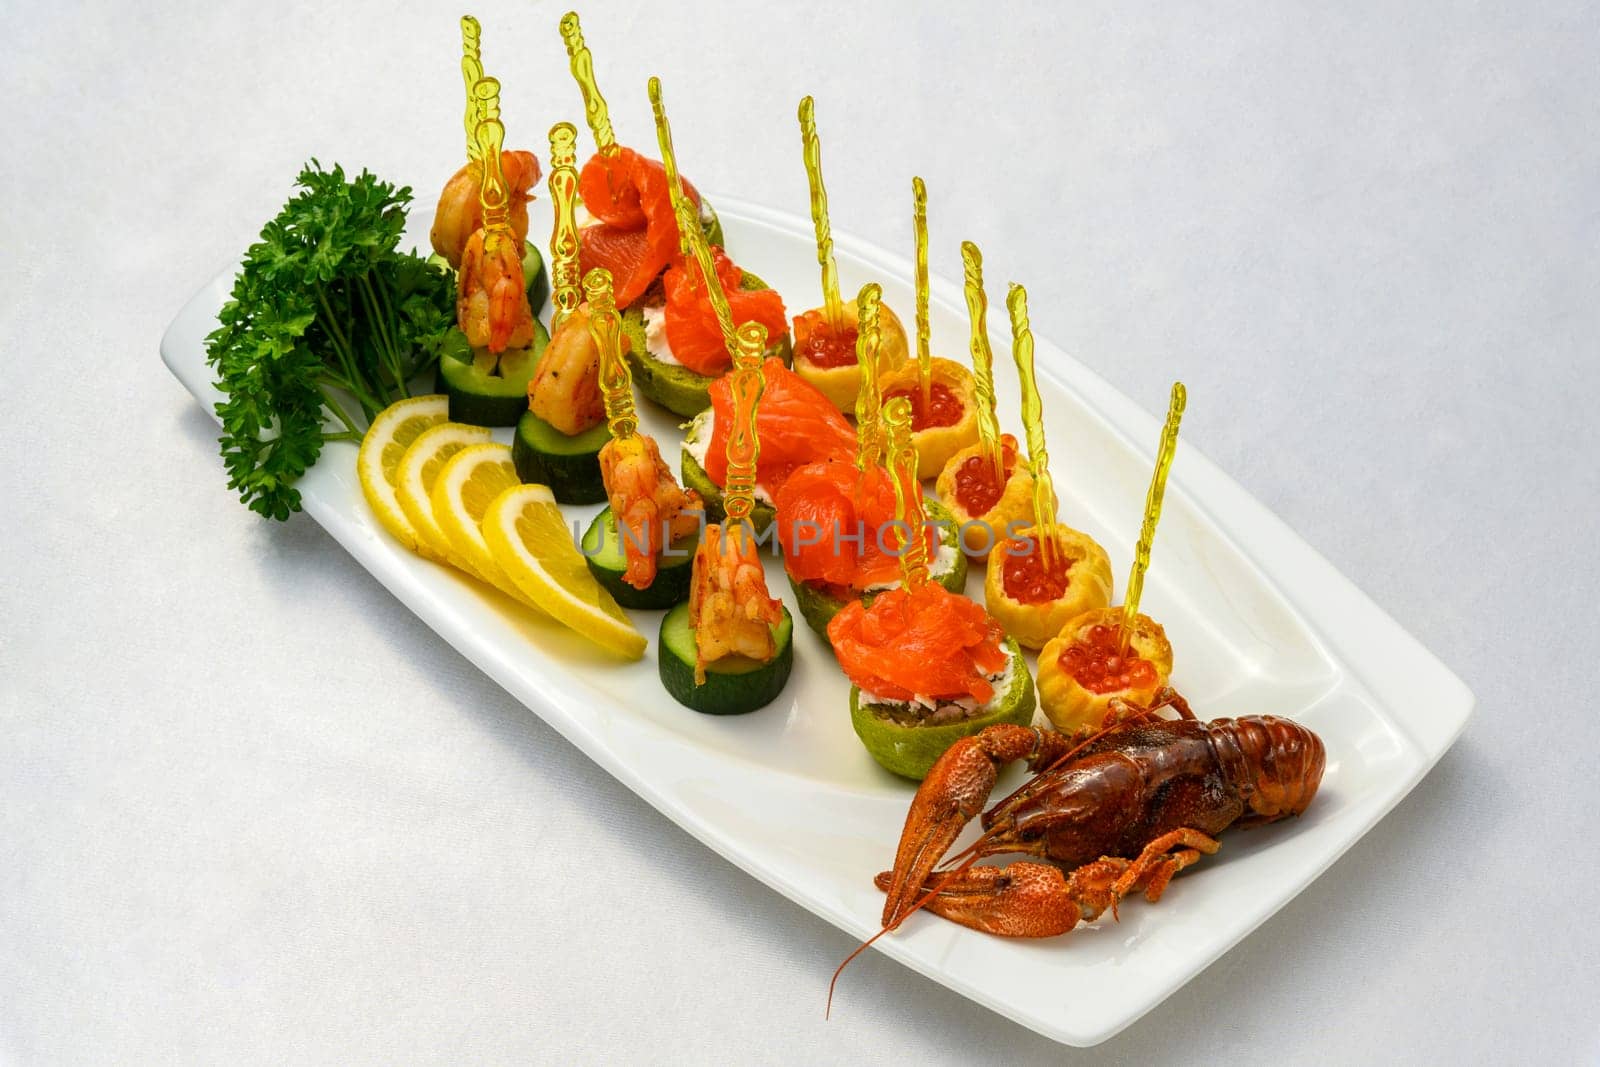 A cooked cancer with appetizers on skewers on the plate